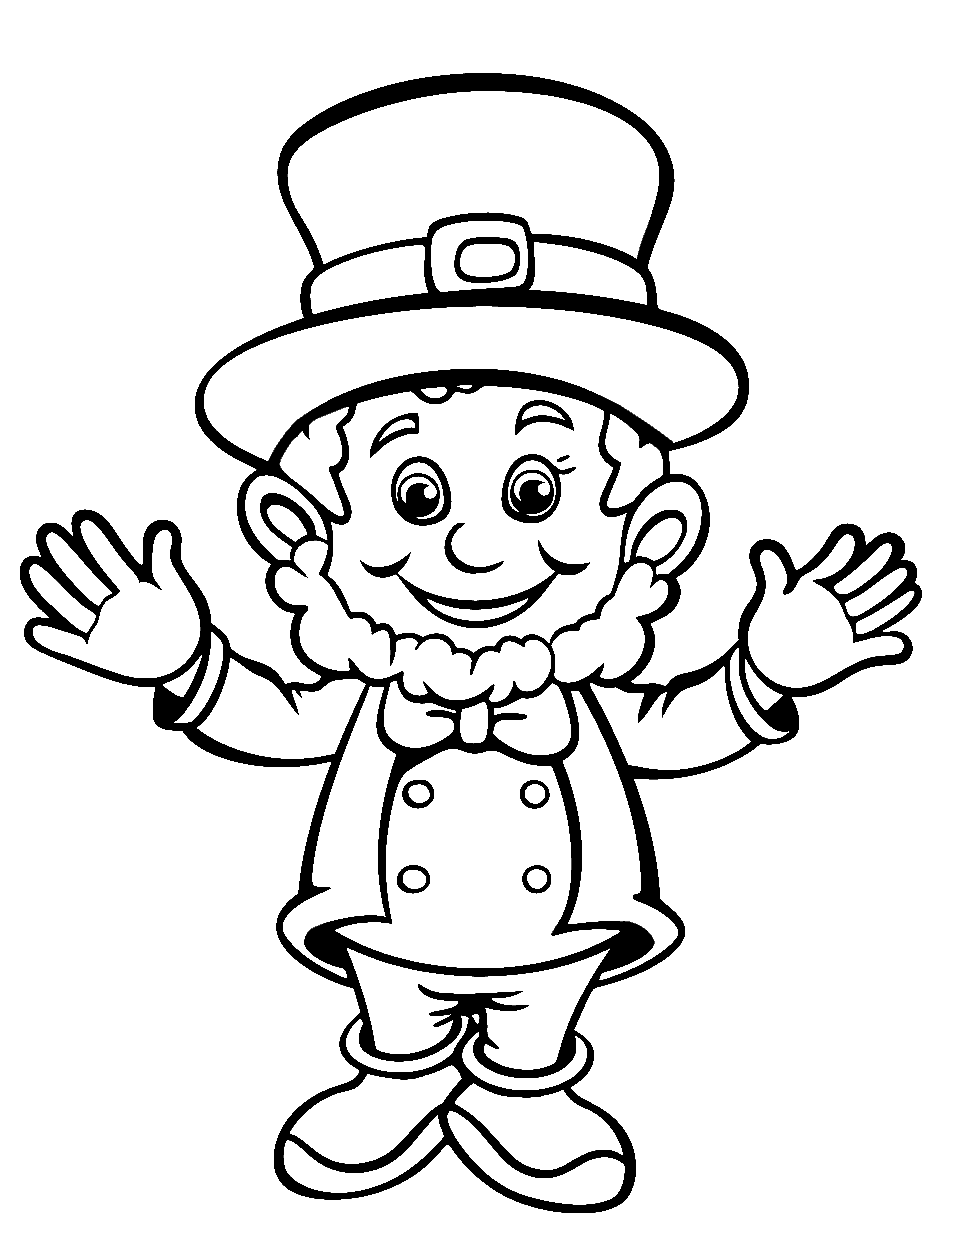 Easy to Draw Friendly Leprechaun Coloring Page - An easy-to-draw friendly Leprechaun ready to get colored.